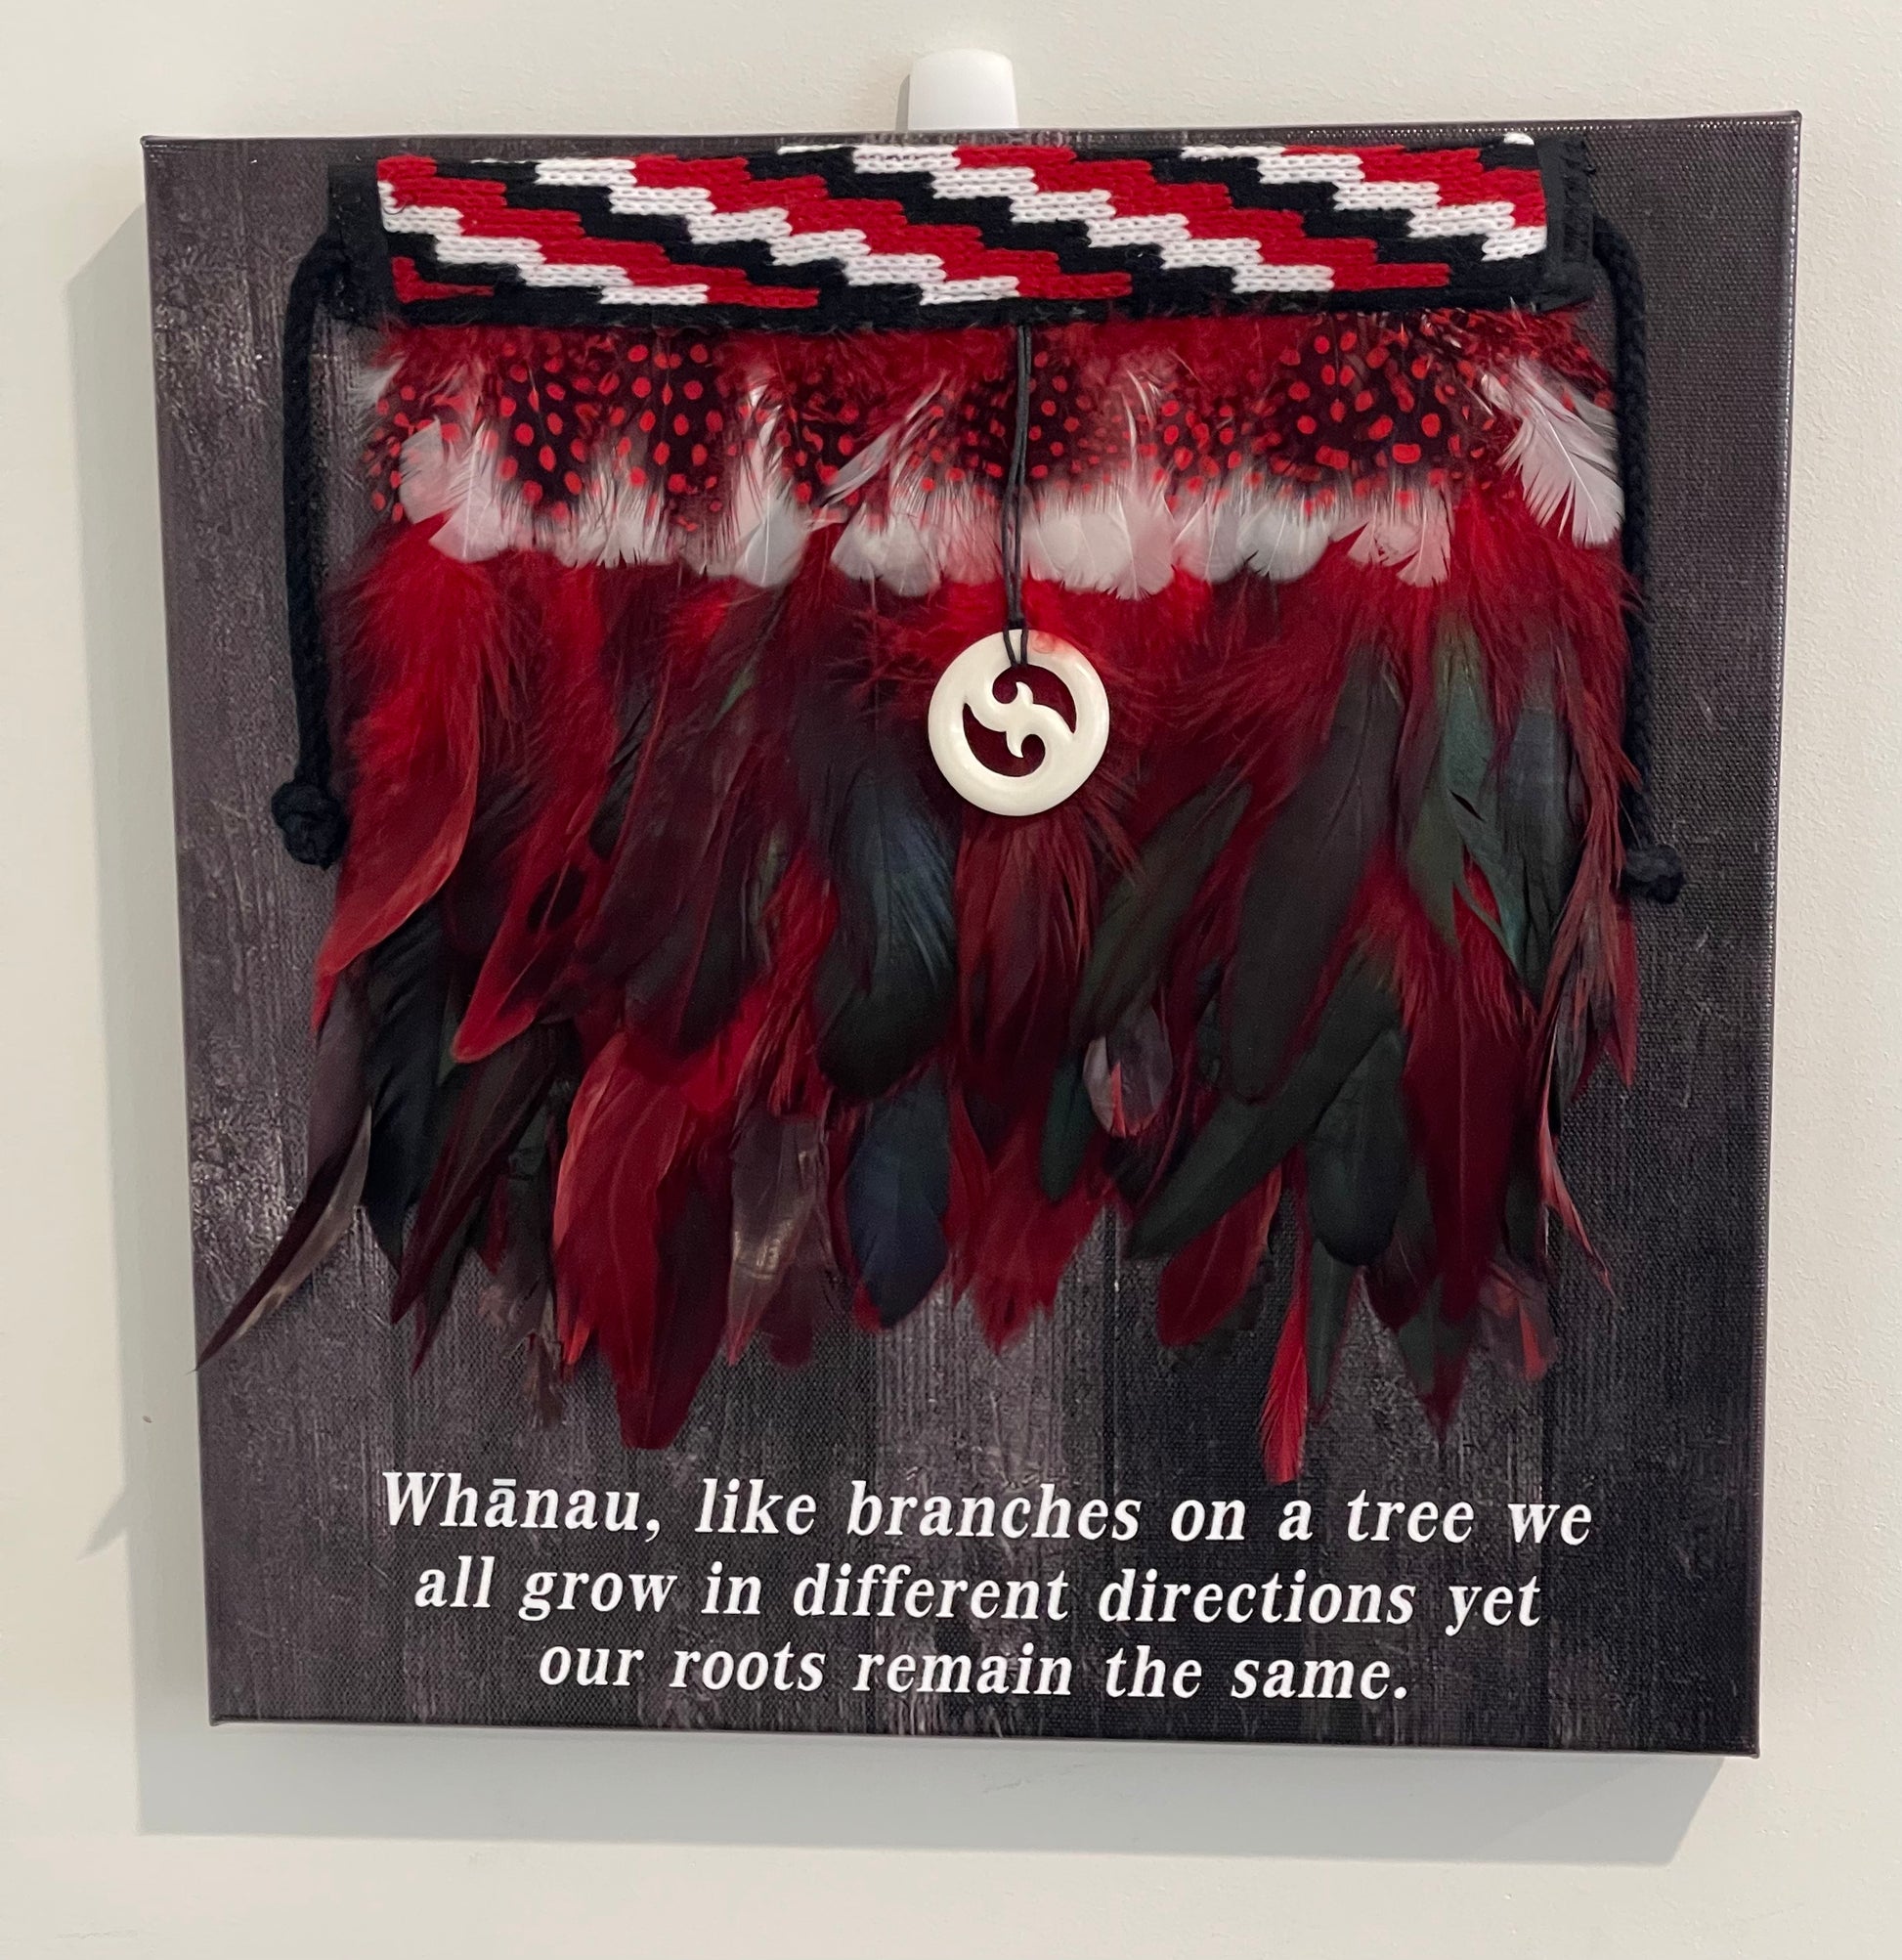 Red Korowai On Canvas With a Saying - Branches